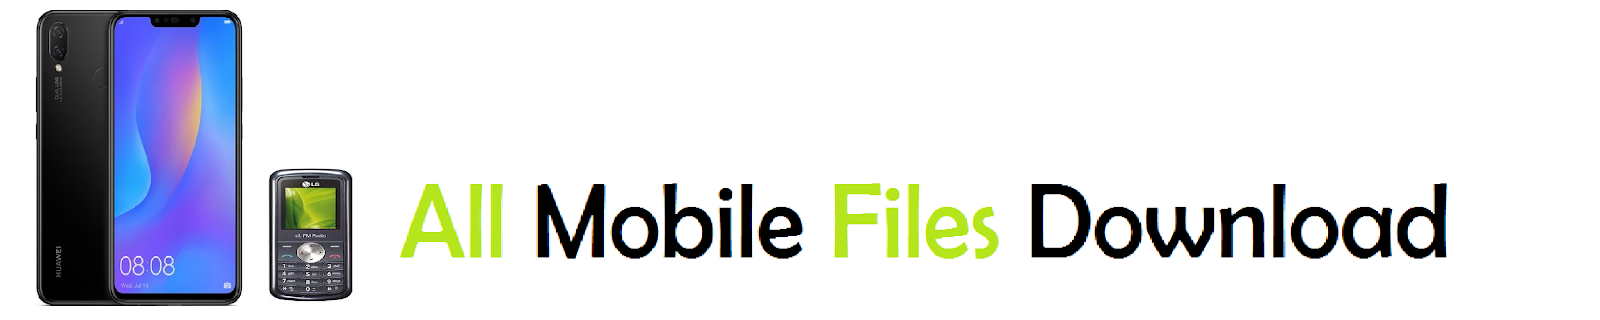 All Mobile Files Free Download